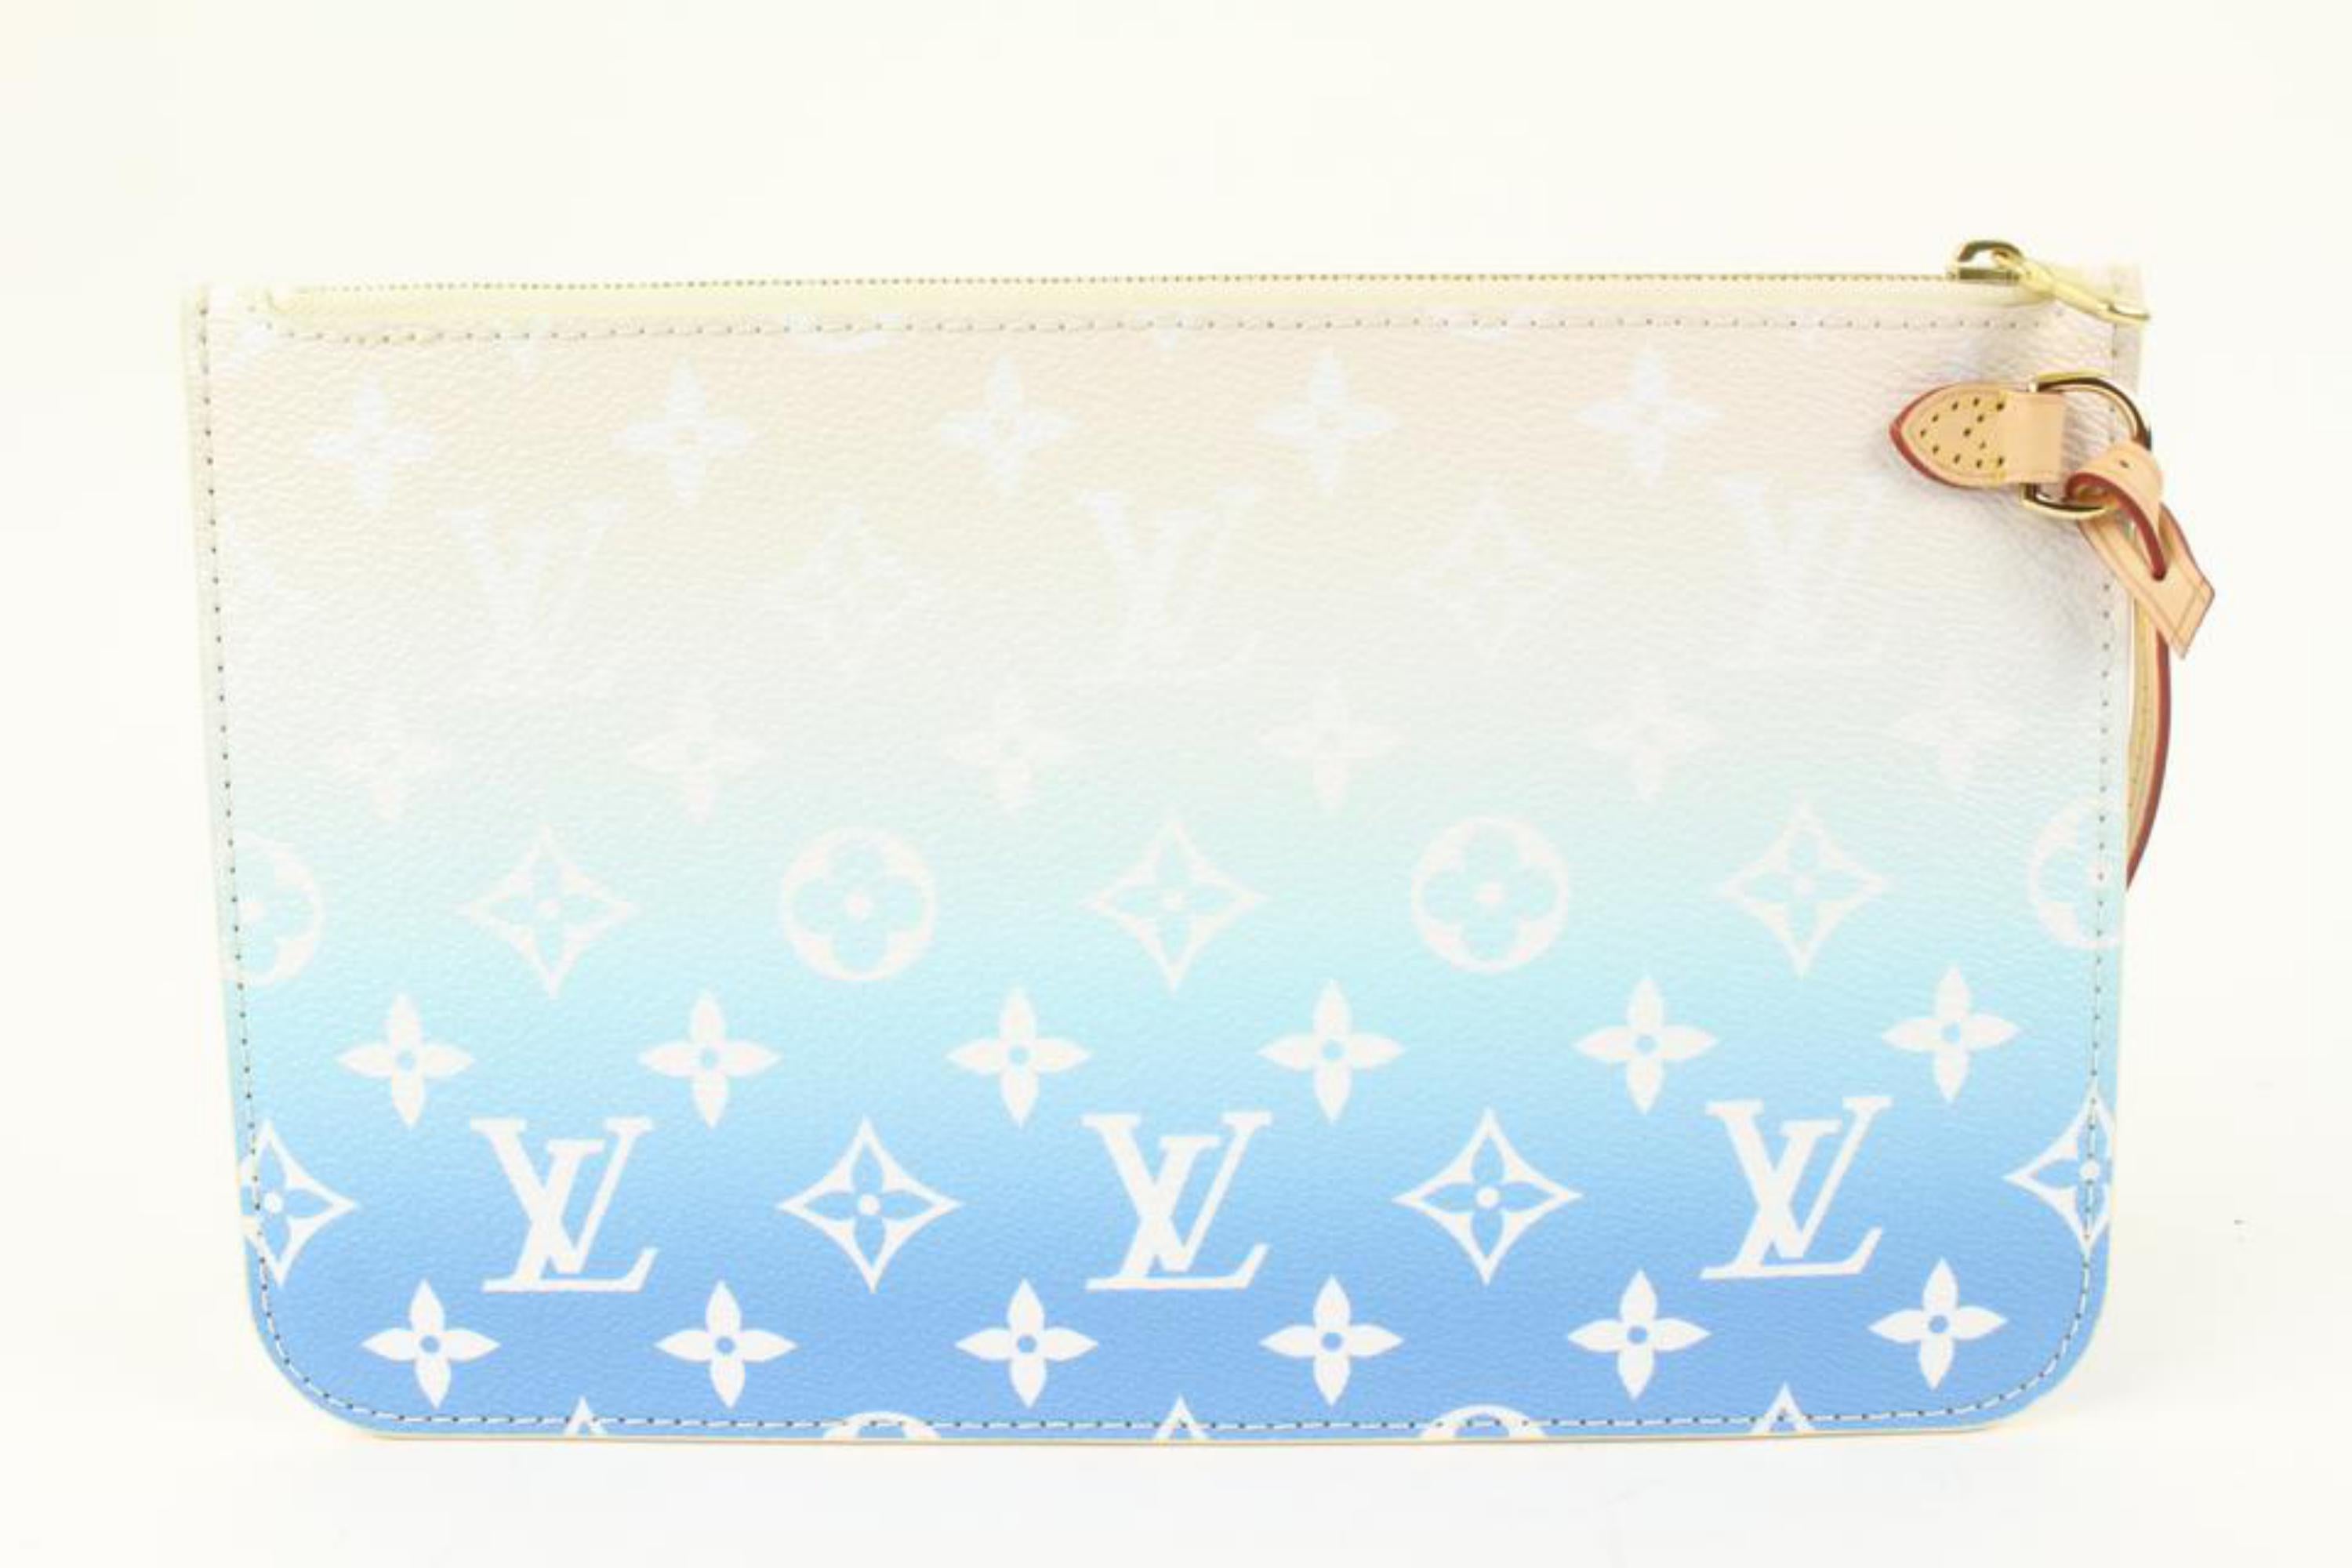 Louis Vuitton Limited Monogram Blue By the Pool Neverfull Pochette Wristlet 21lk311s
Date Code/Serial Number: RFID Chip
Made In: France
Measurements: Length:  9.75